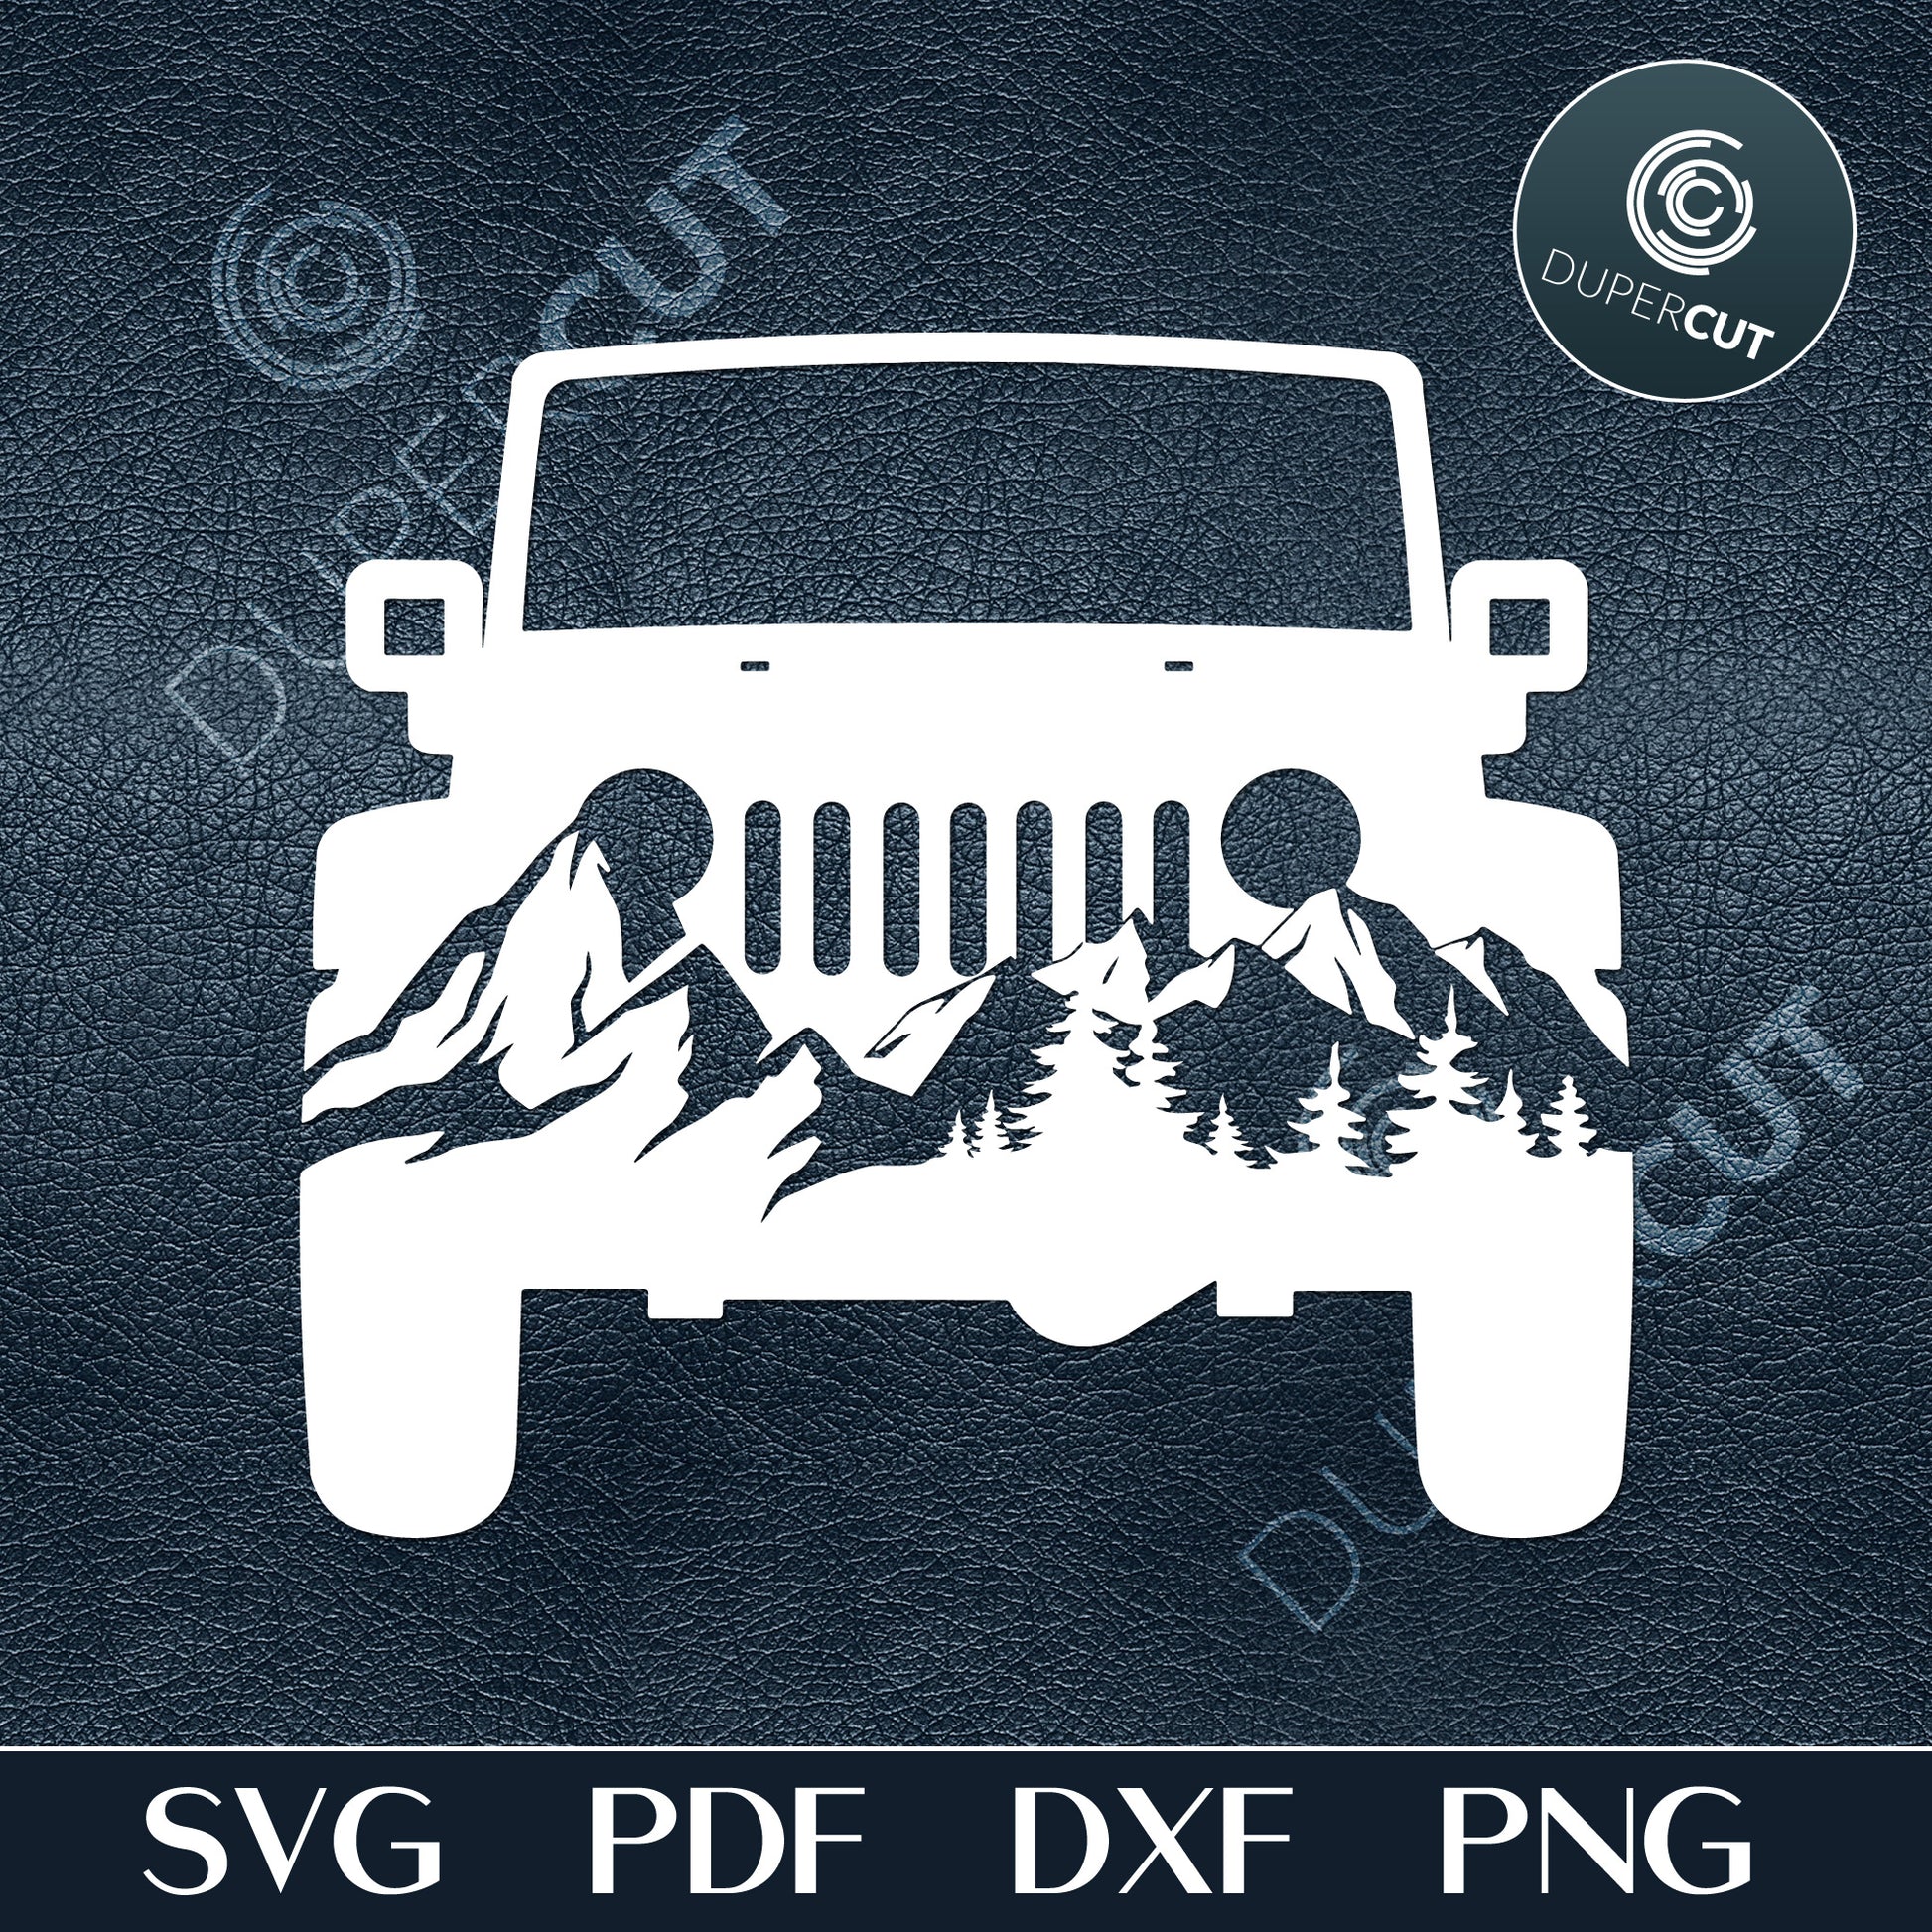 Jeep with mountains, offroading overlanding. Black and white silhouette clipart for crafting, print on demand, custom t-shirts, vinyl template, stencil, printables